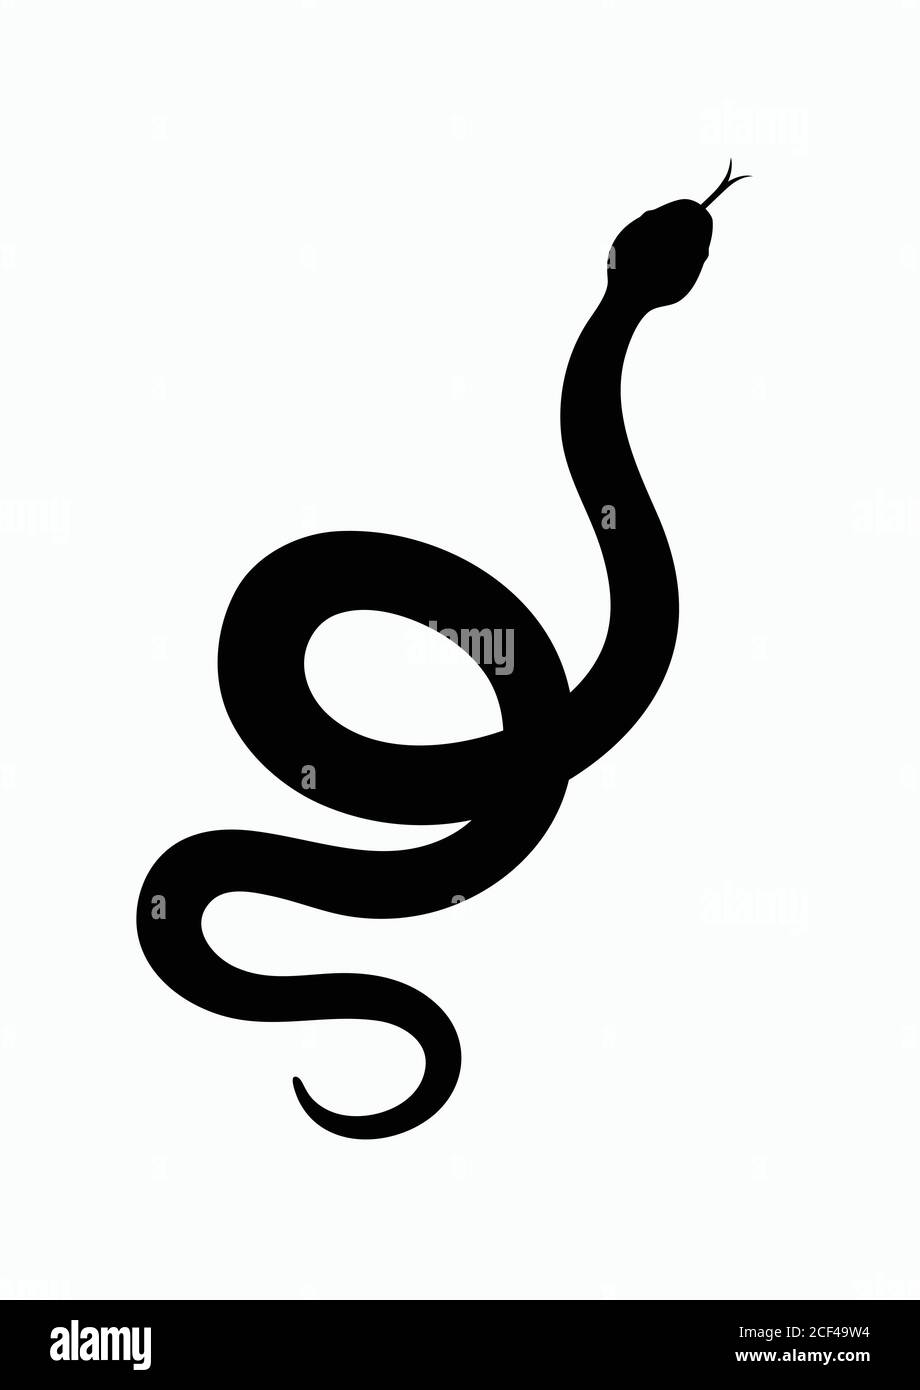 Black silhouette snake. Isolated symbol or icon snake on white background. Abstract sign snake. Vector illustration Stock Vector